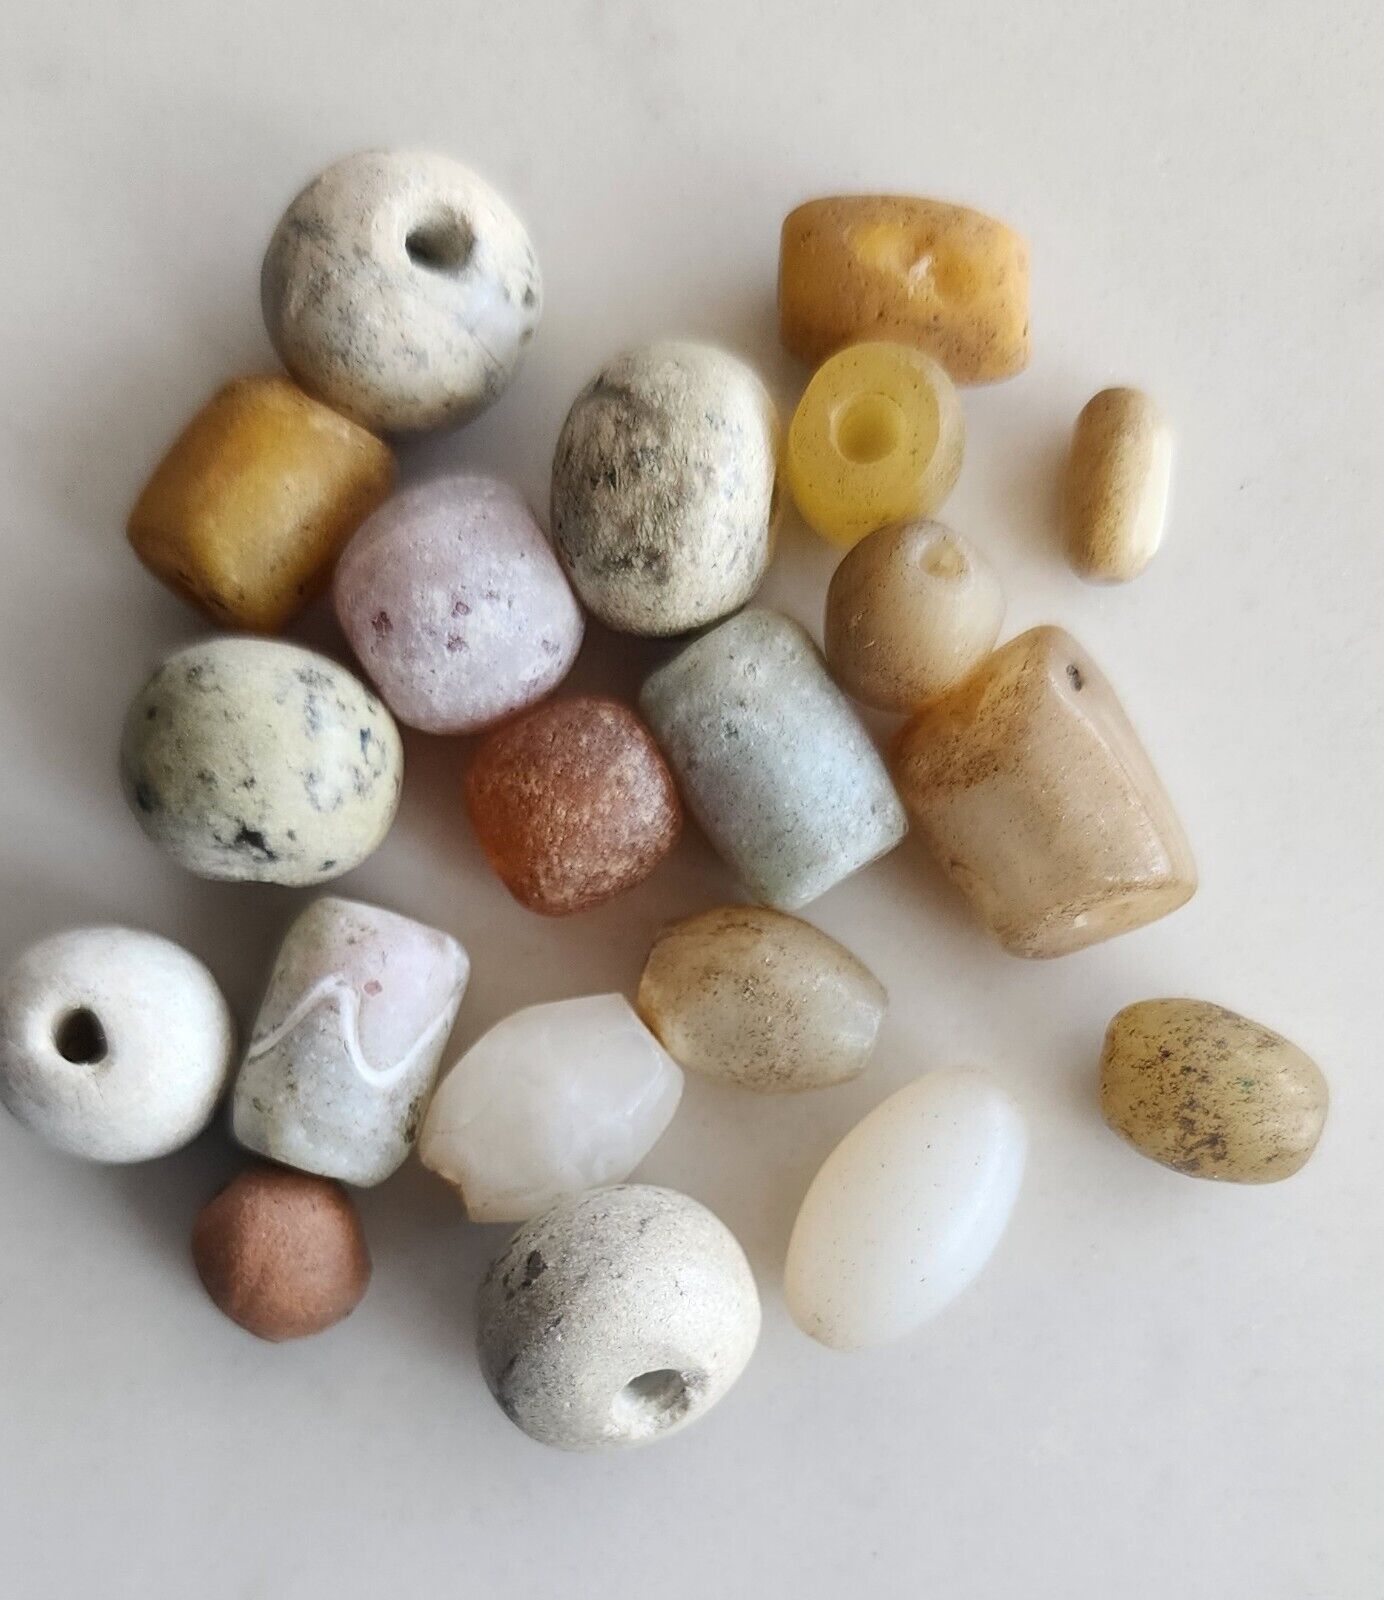 Antique beads, old stone beads, excavated, collectors beads, 20 beads (V956)